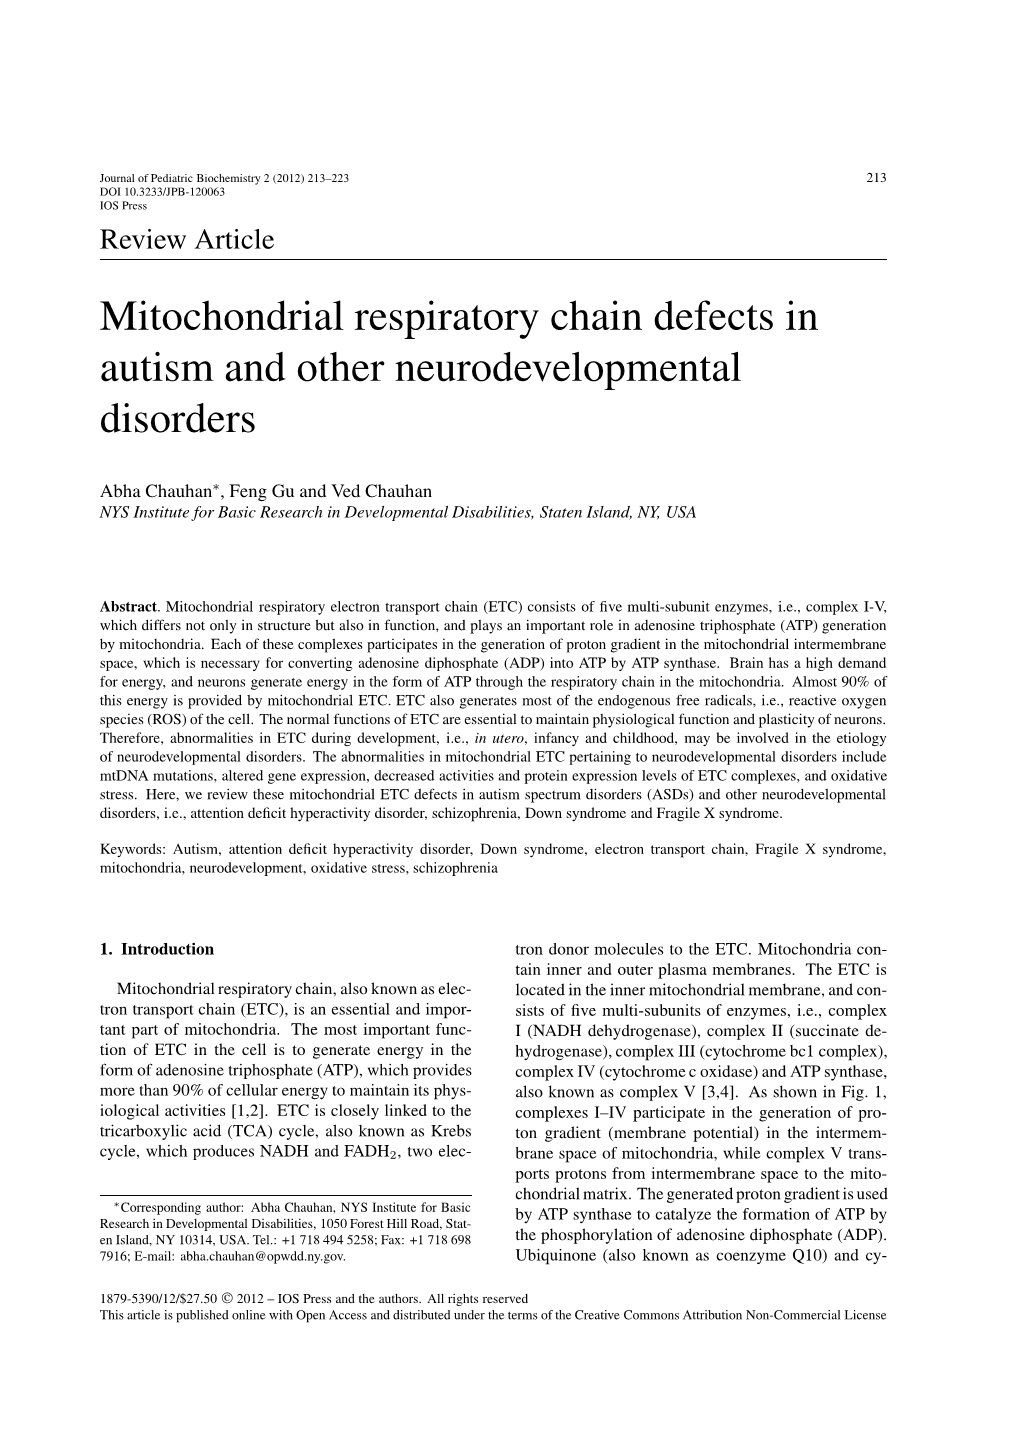 Mitochondrial Respiratory Chain Defects in Autism and Other Neurodevelopmental Disorders